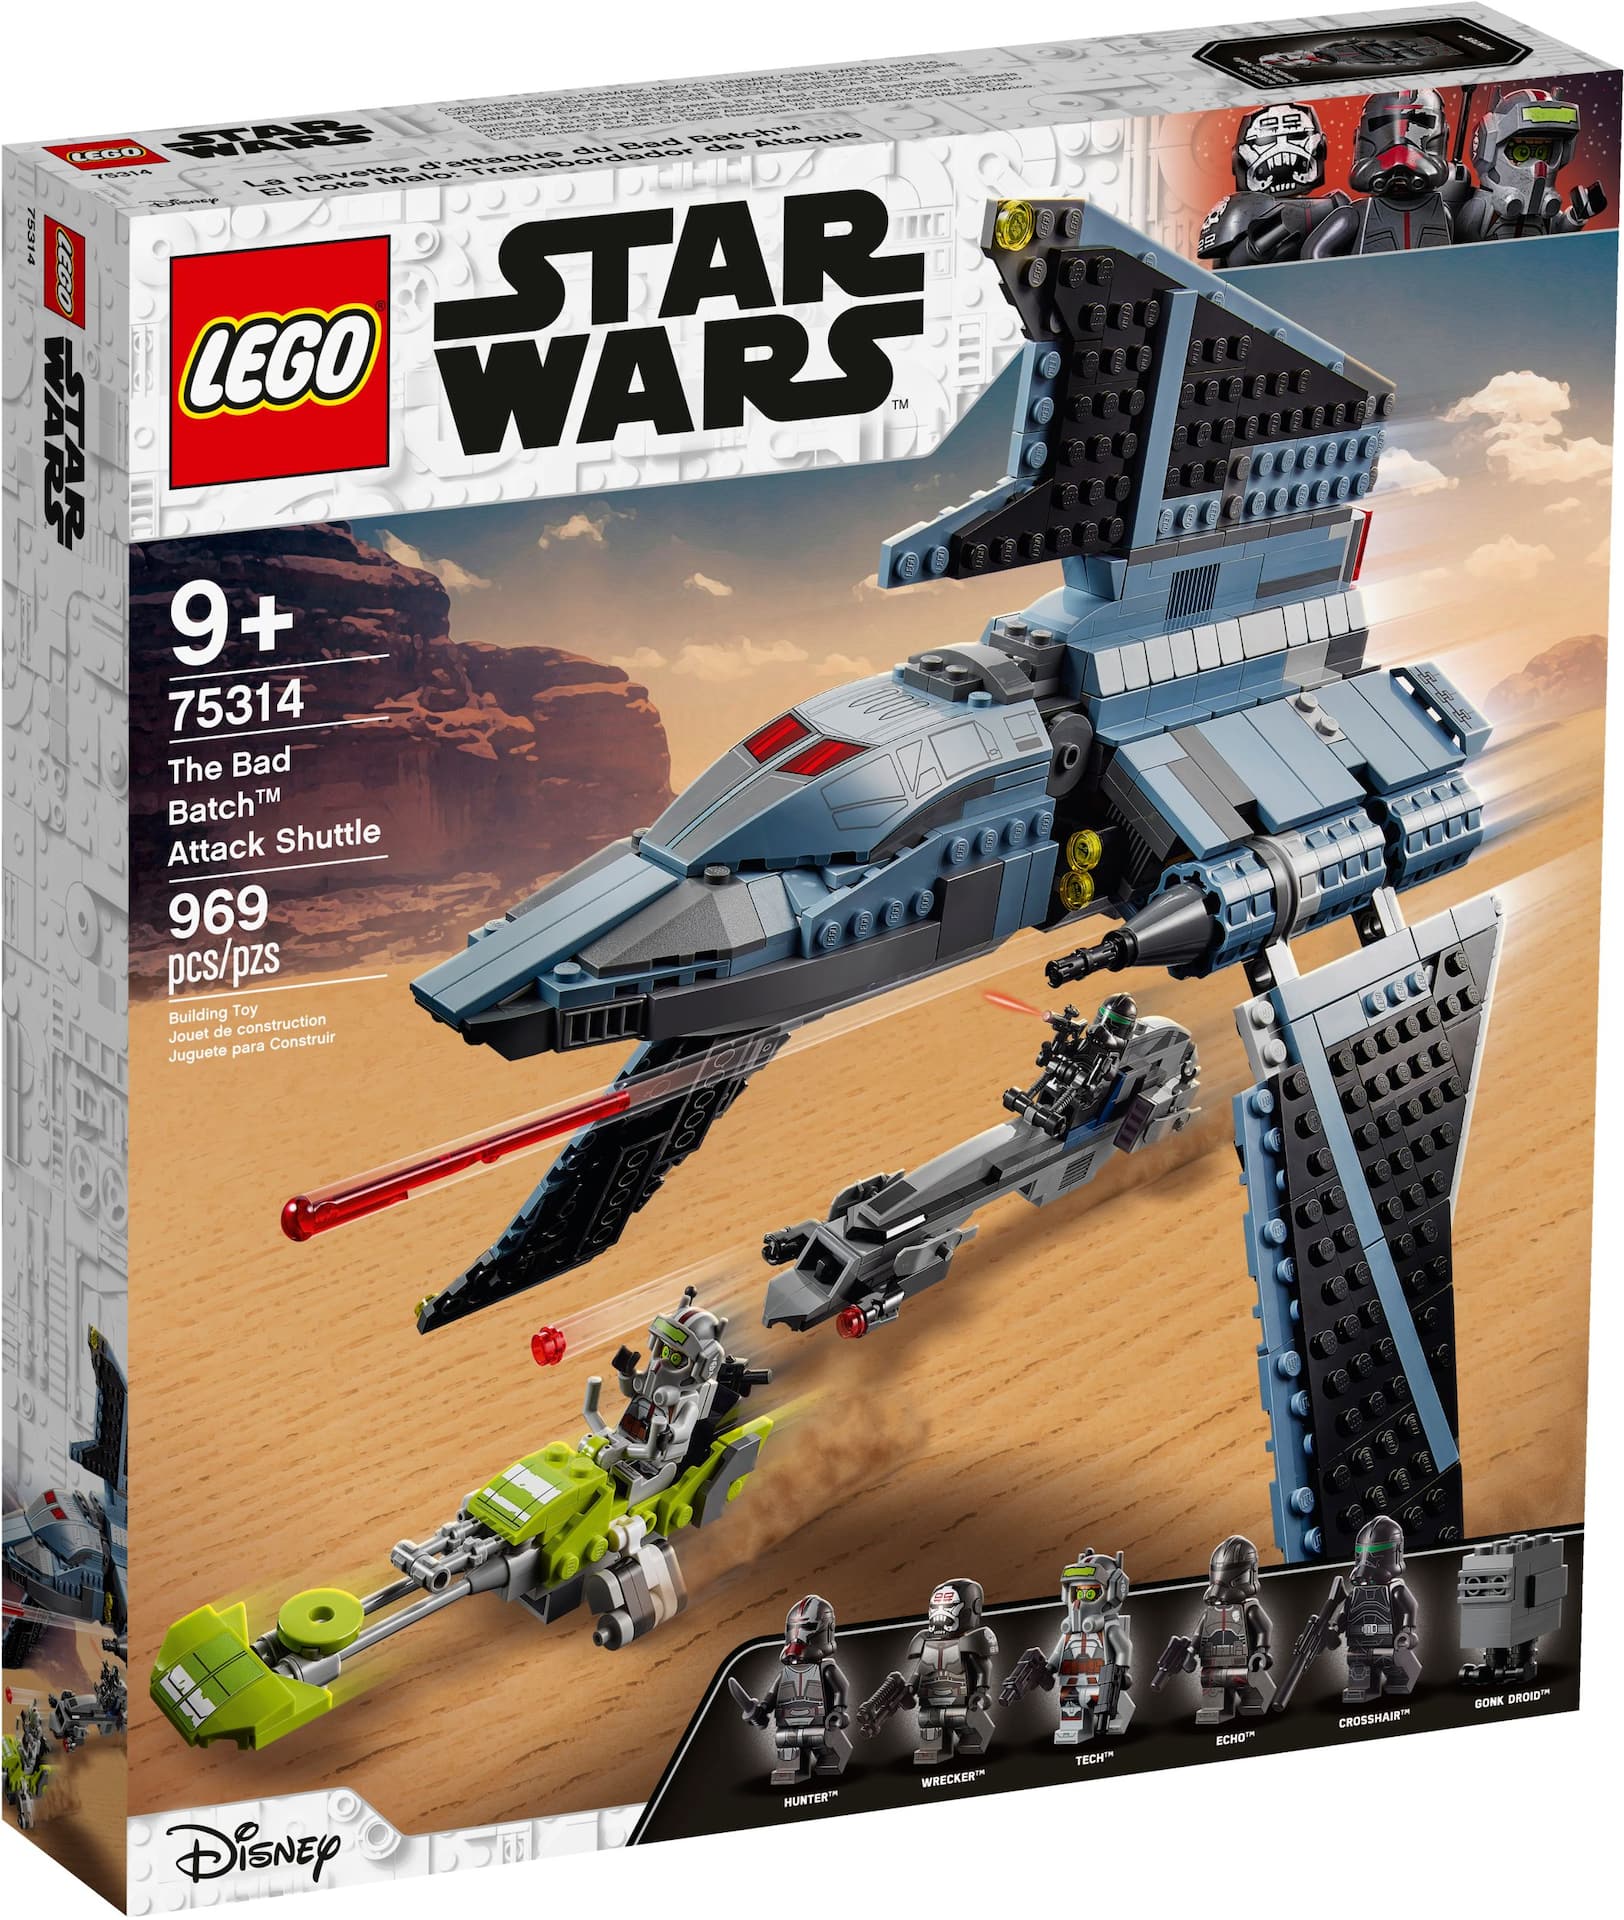 LEGO® Star Wars™ The Bad Batch™ Attack Shuttle - 75314, 969 pcs, Age 9+